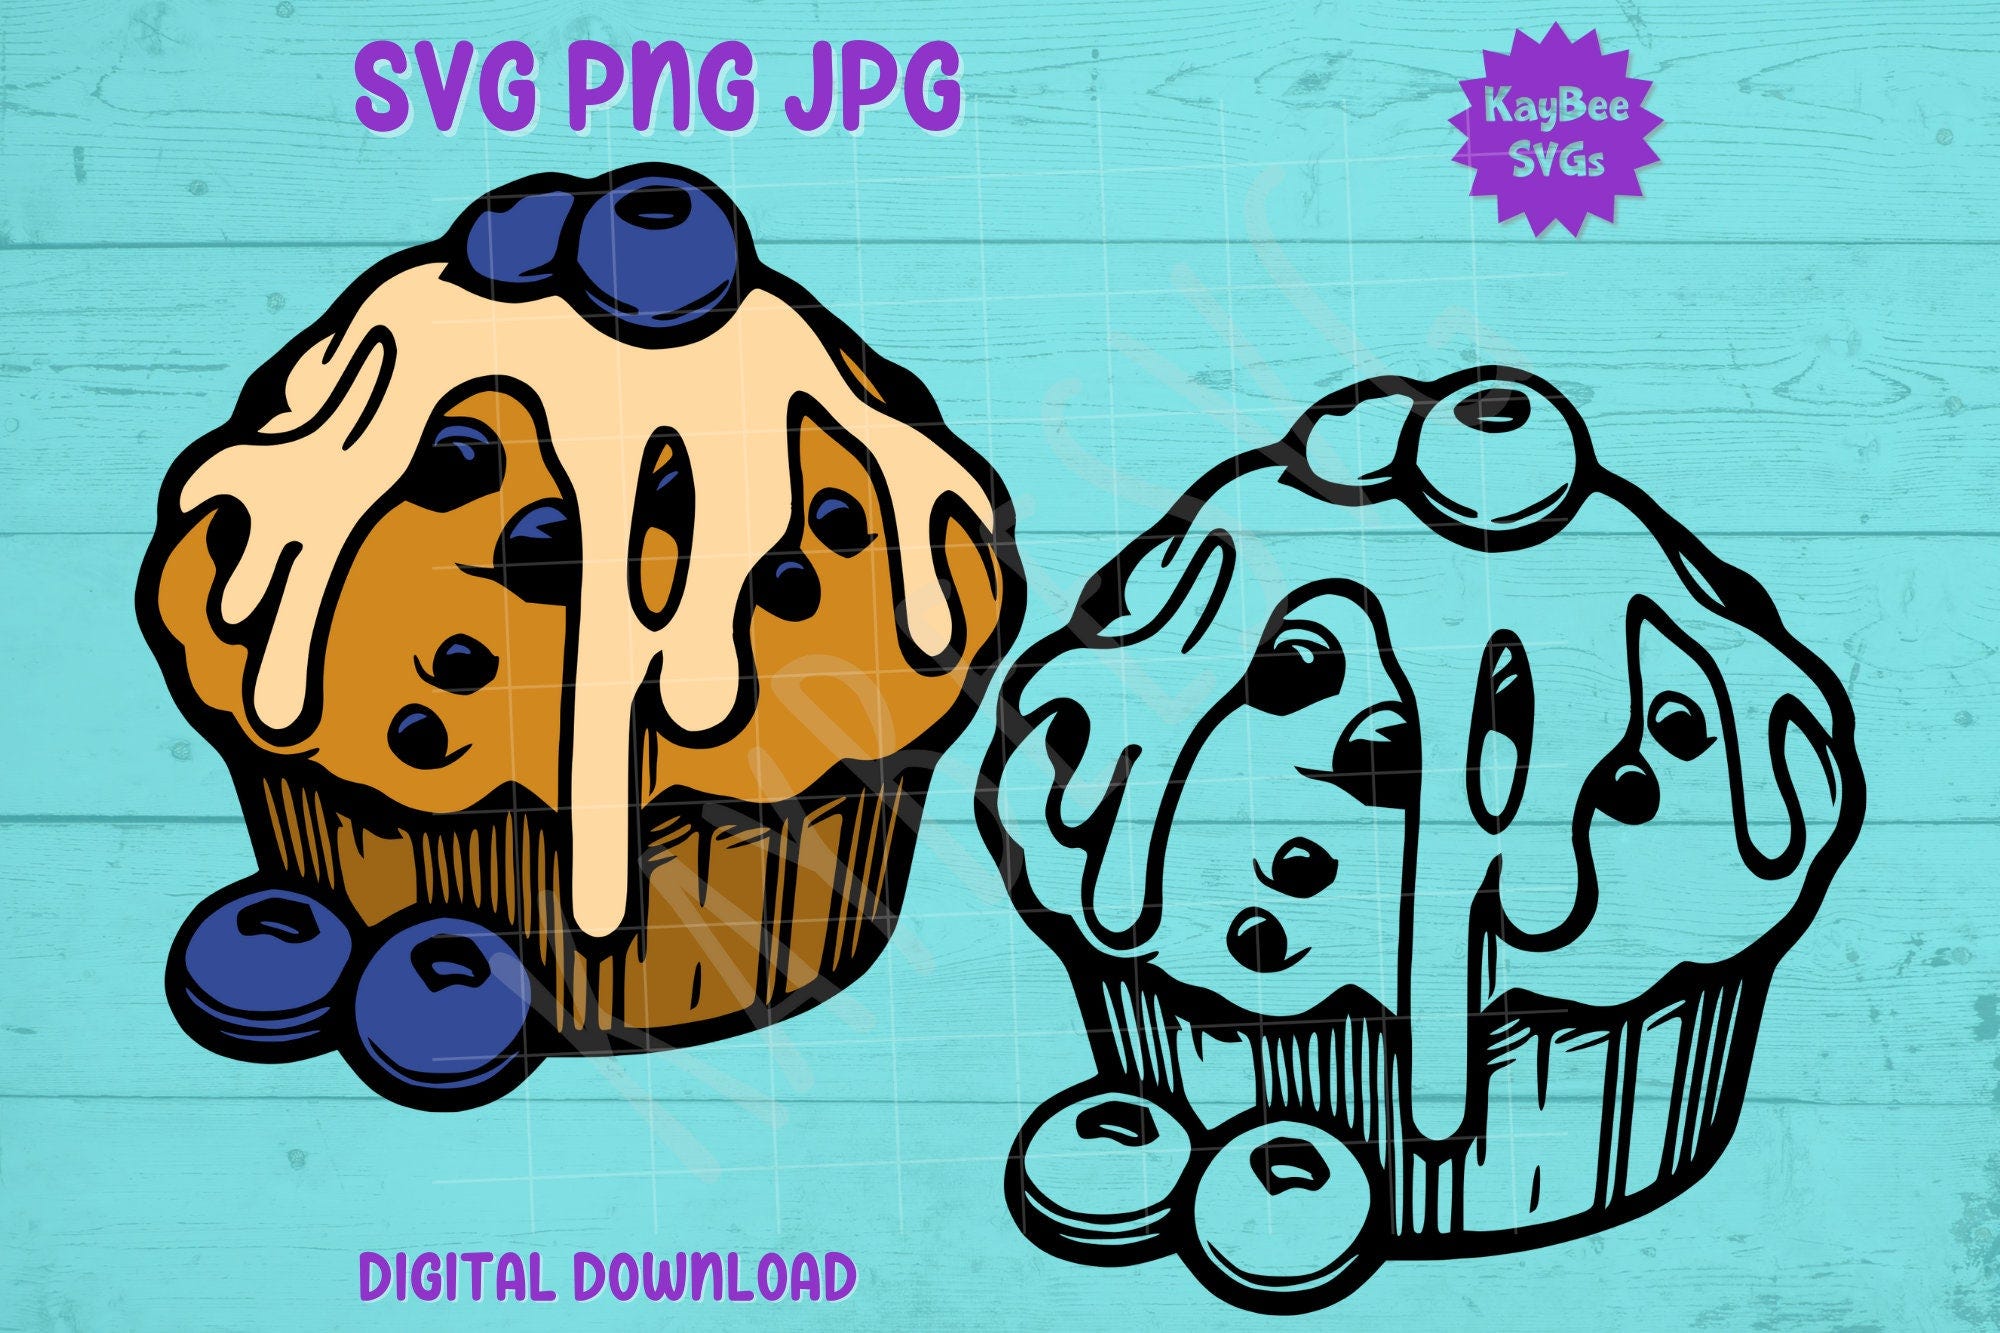 Blueberry Muffin SVG PNG JPG Clipart Digital Cut File Download for Cricut Silhouette Sublimation Printable Art - Commercial Use